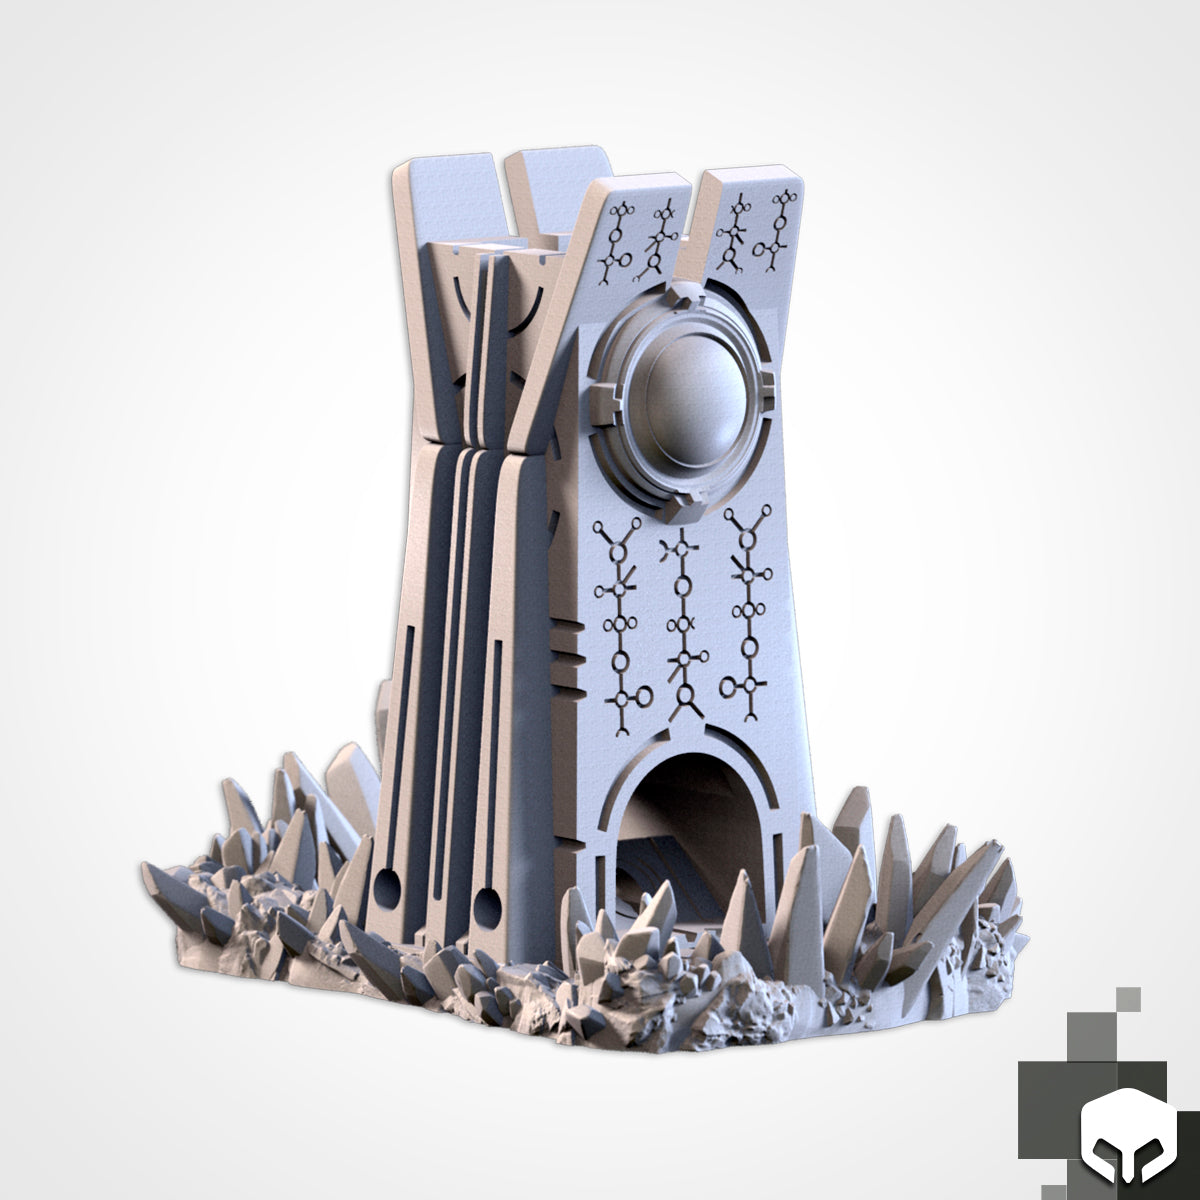 The Game of Destiny - Alien 'Xeno Tower' Dice Tower